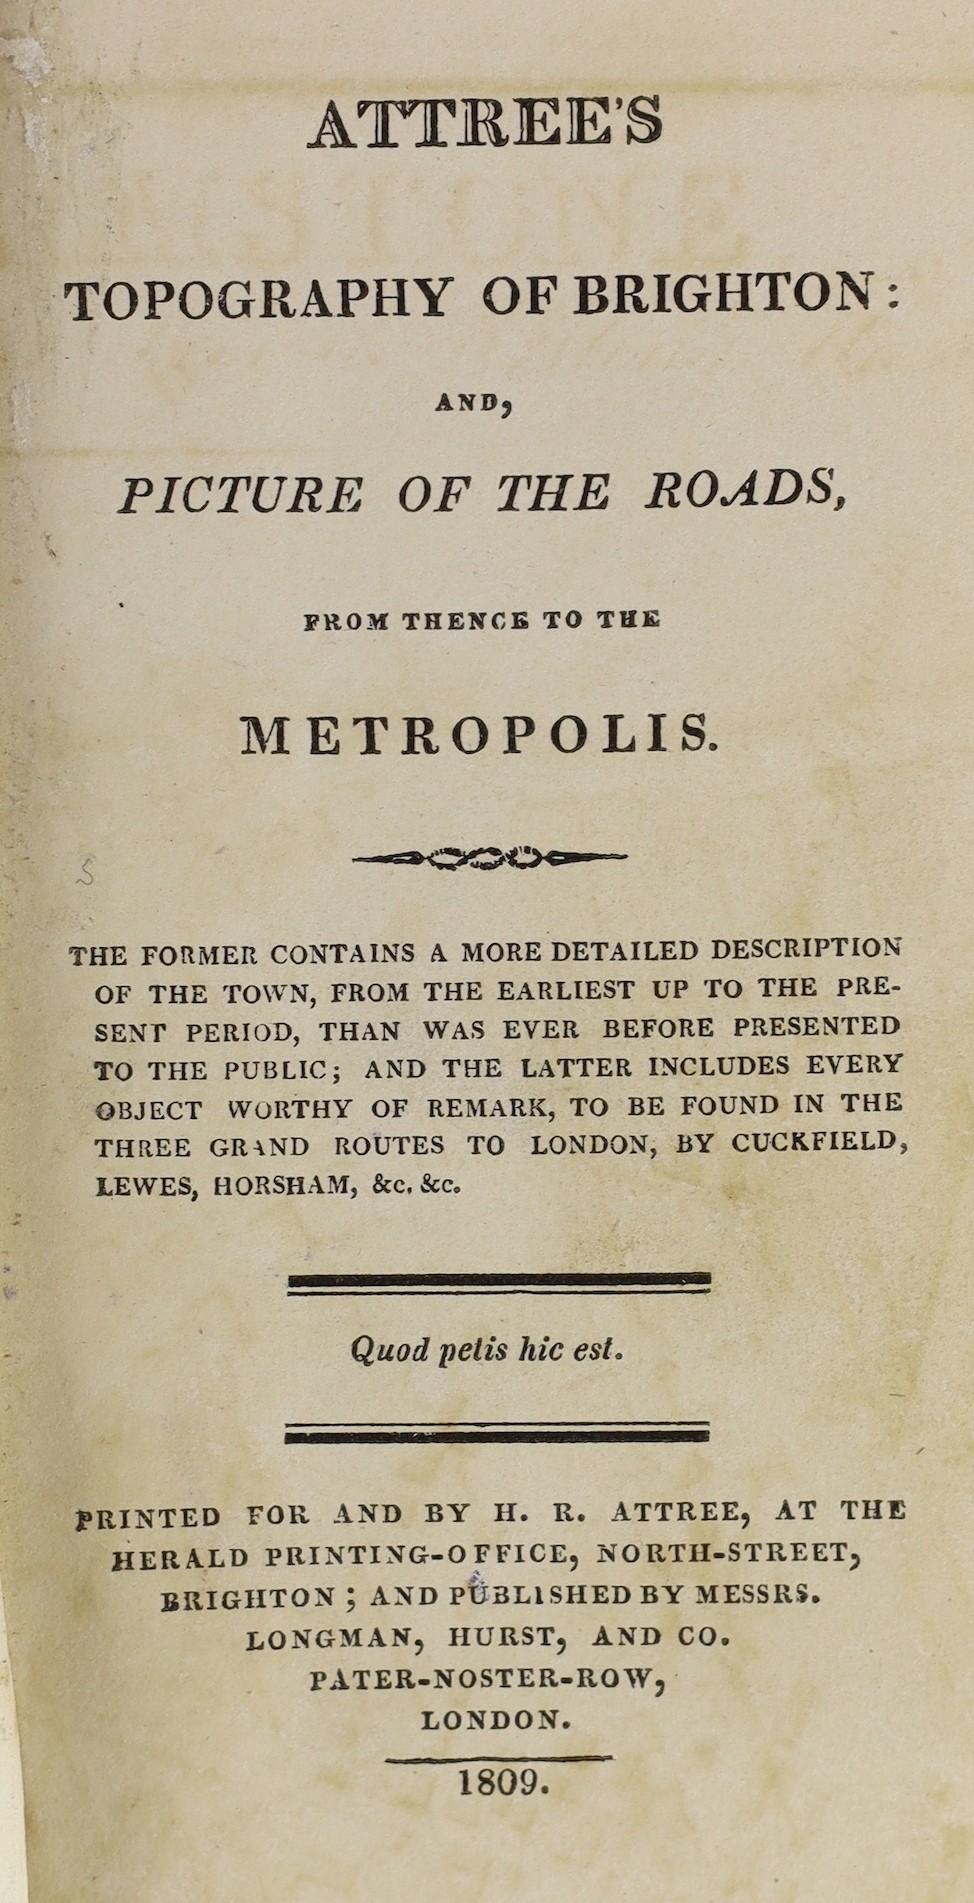 BRIGHTON: (Brighton) Attree's Topography of Brighton: and, Picture of the Roads, from thence to the Metropolis ... folded plan (detailed), folded map and 2 plates, half title; rebound morocco backed cloth with gilt spine